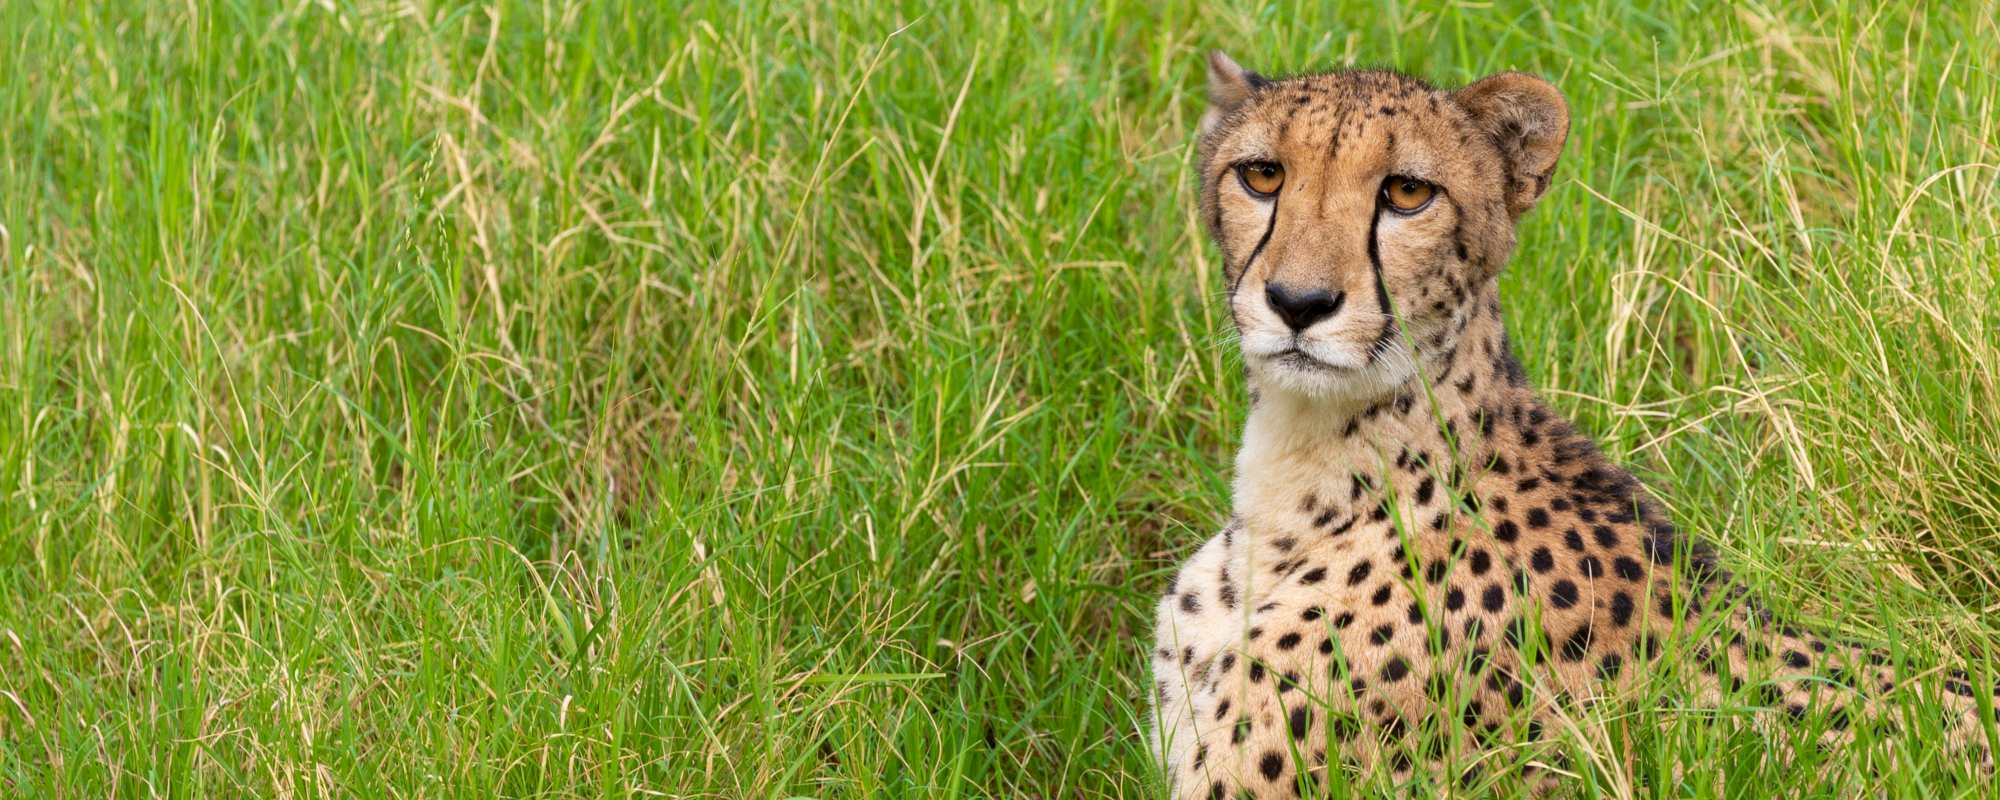 Celebrate cheetah day with The Living Desert Zoo and Gardens.